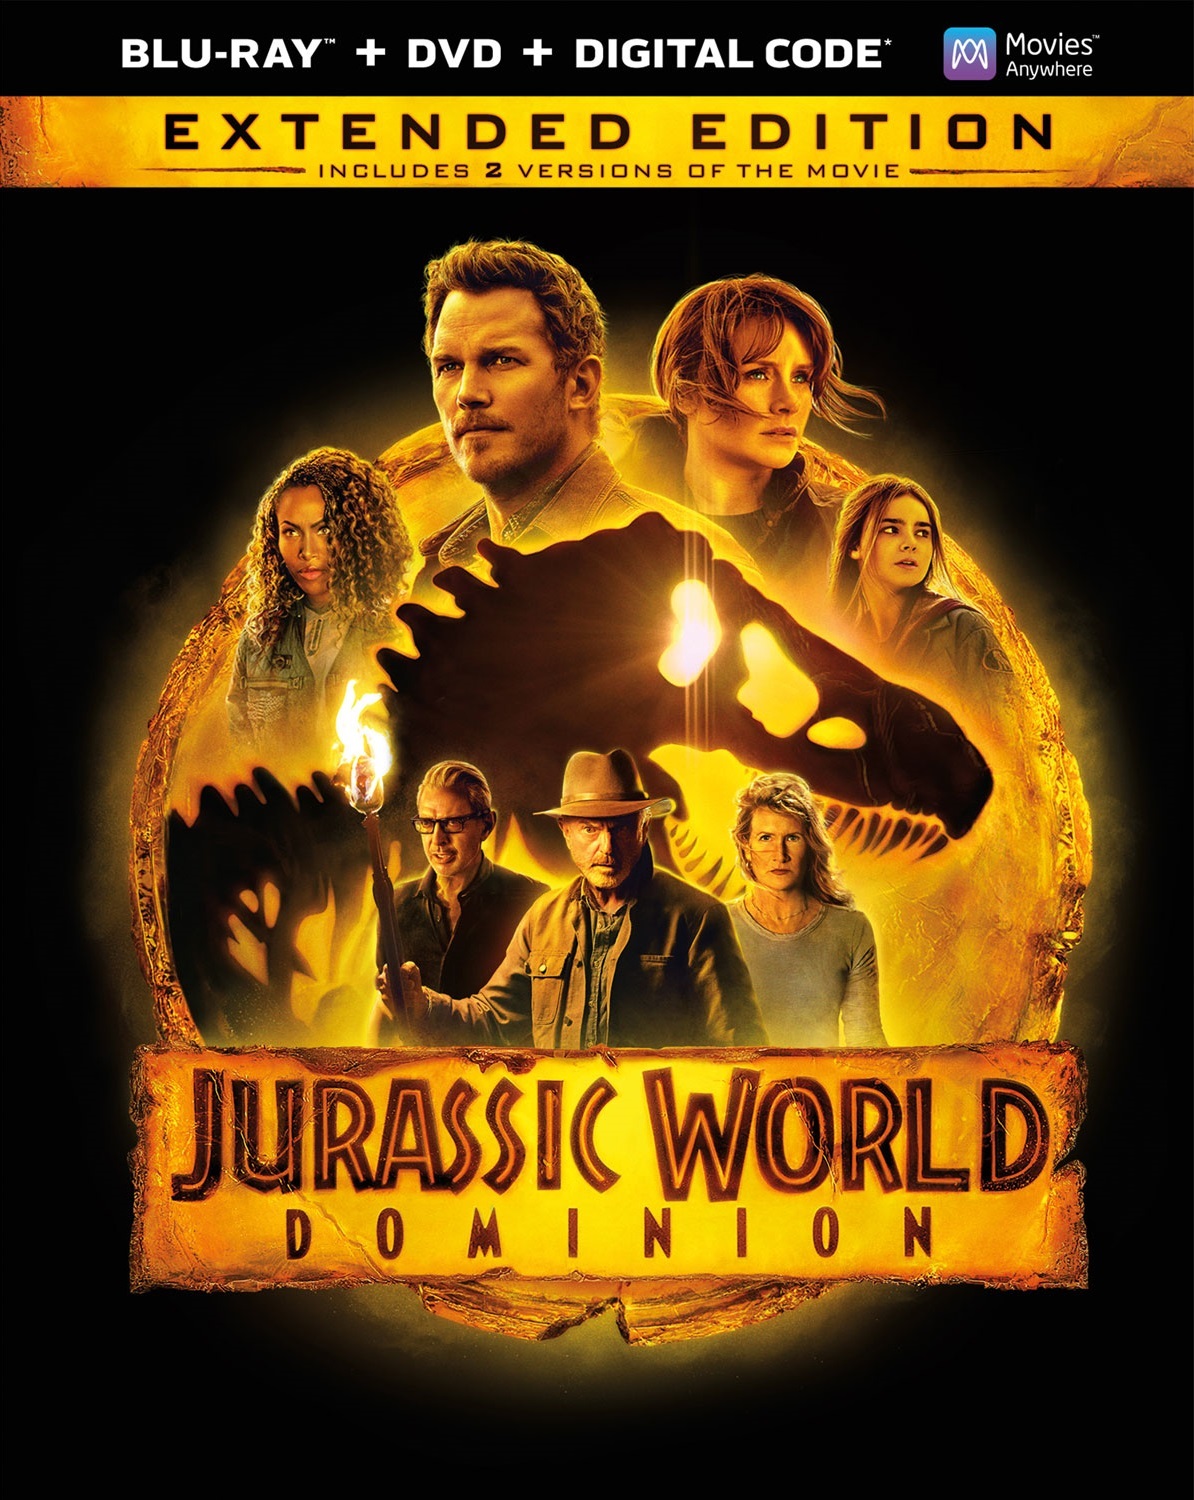 Jurassic World Dominion (2022) [Theatrical and Extended Edition] Jurassic World: Dominio (2022) [Versión de Teatro y Extendida] [DTS-HD HRA 7.1 + SUP] [Blu Ray] 310940_front